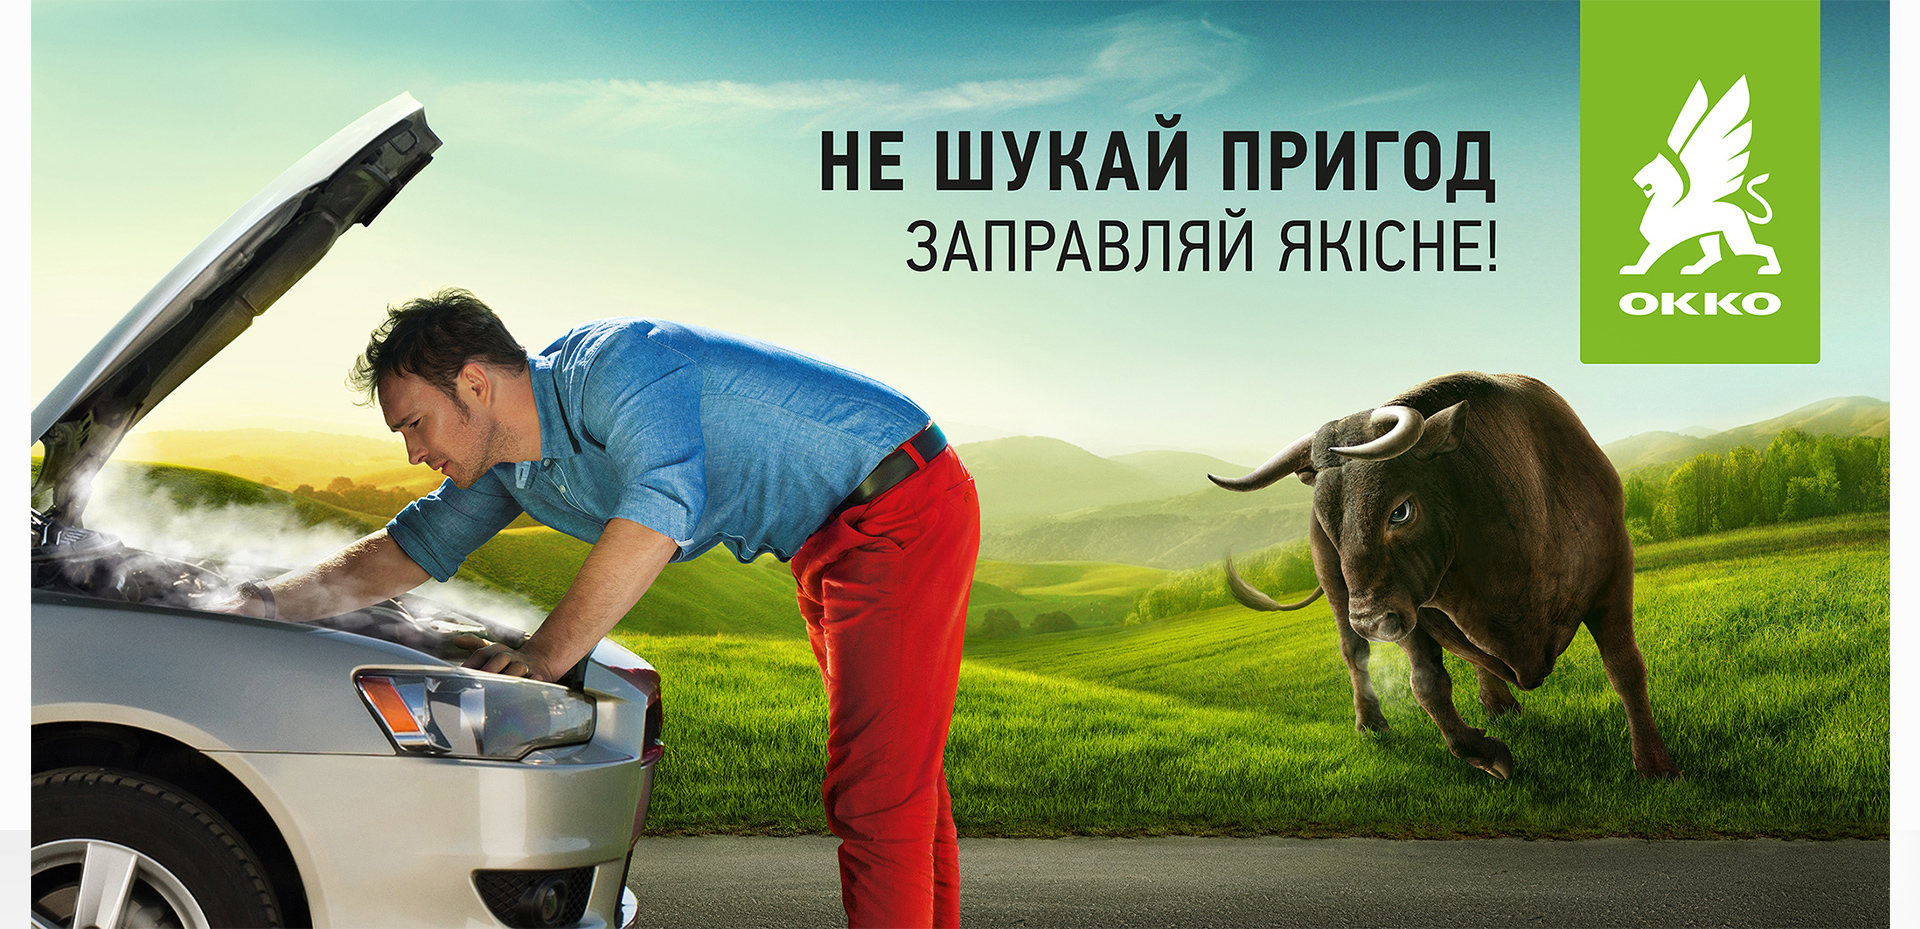 Main characters were a man, who stuck because of troubles with his car and a Bull